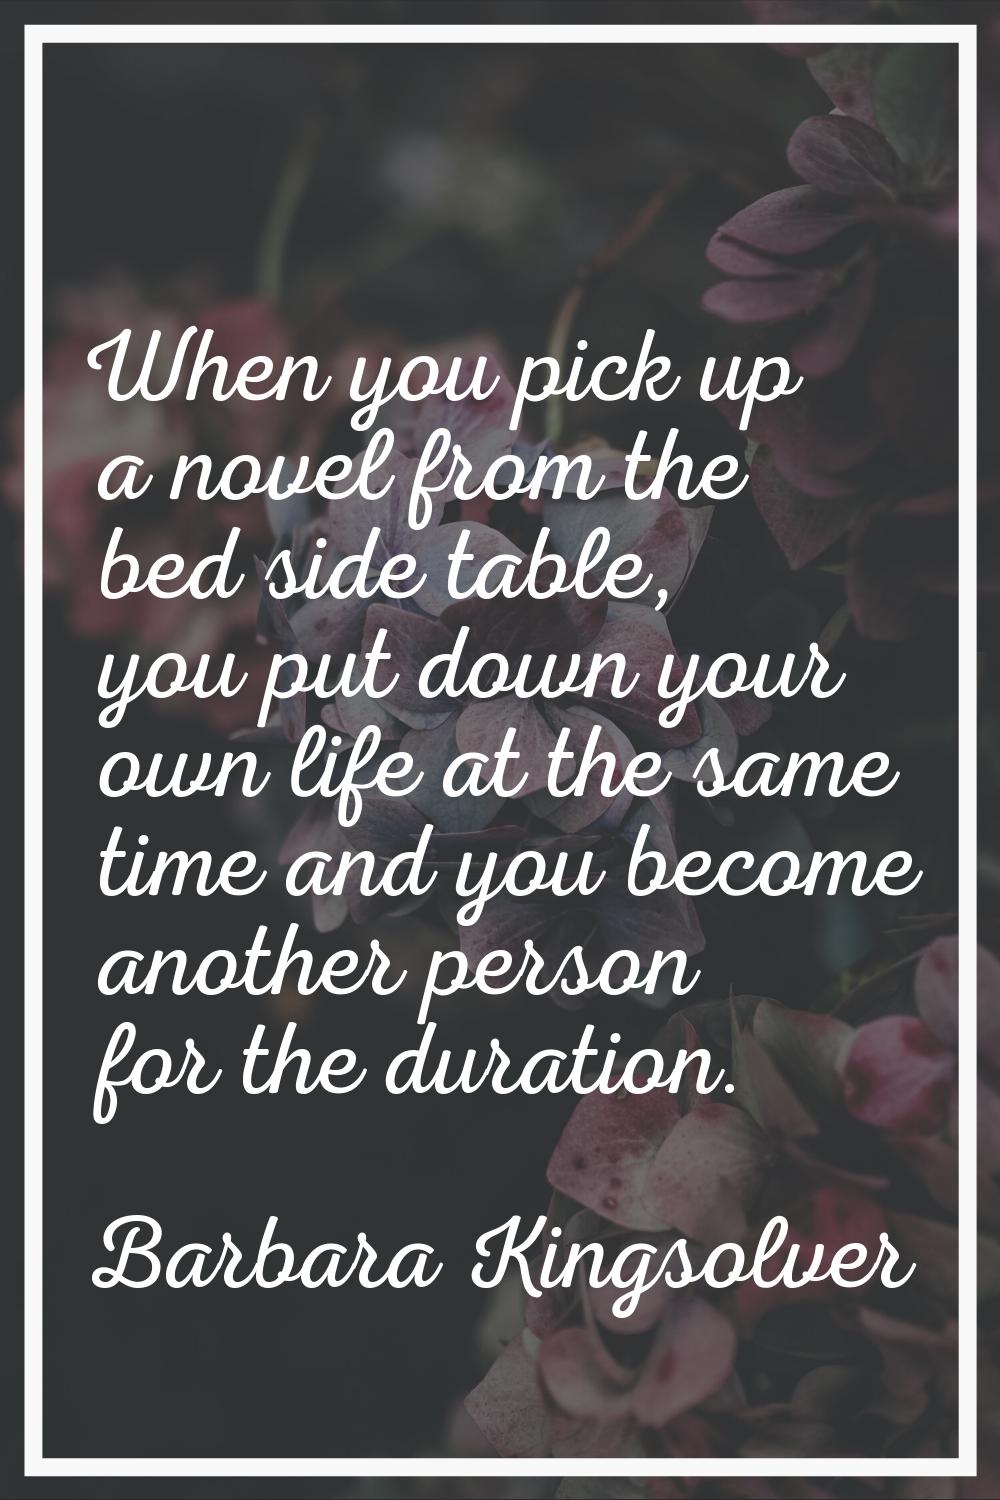 When you pick up a novel from the bed side table, you put down your own life at the same time and y